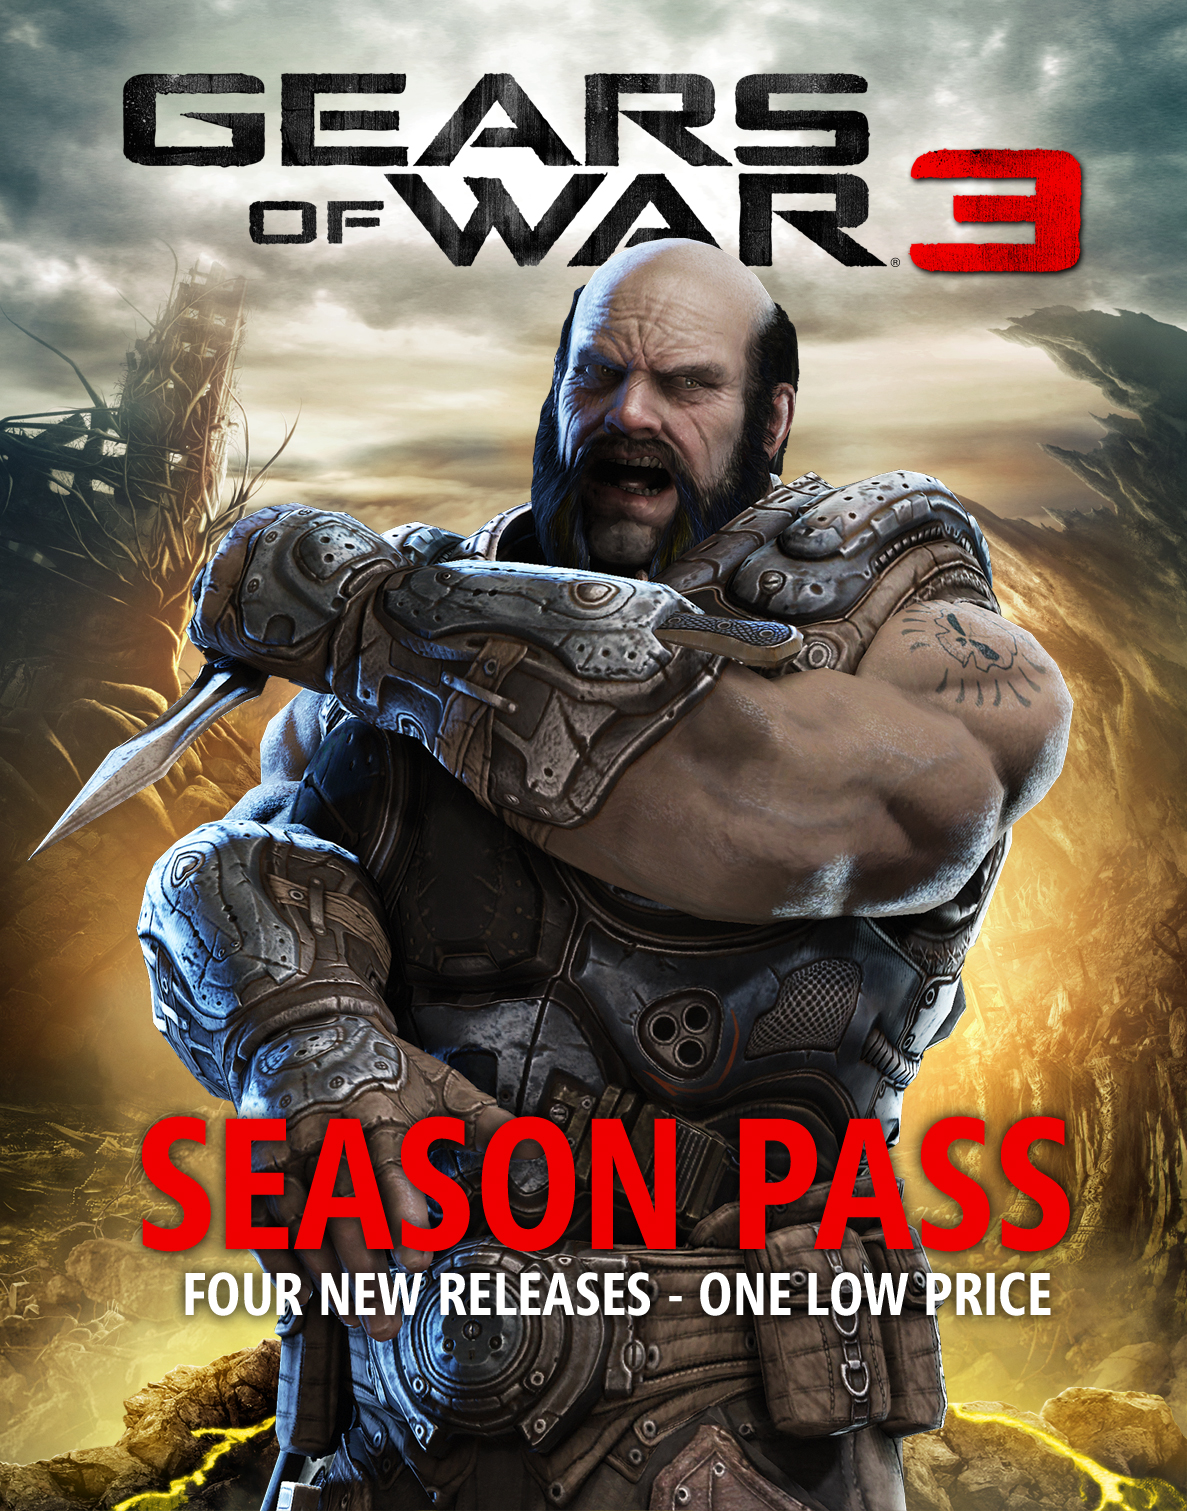 Rumor Gears Of War 3 Season Pass To Also Include The Michael Barrick Character Skin